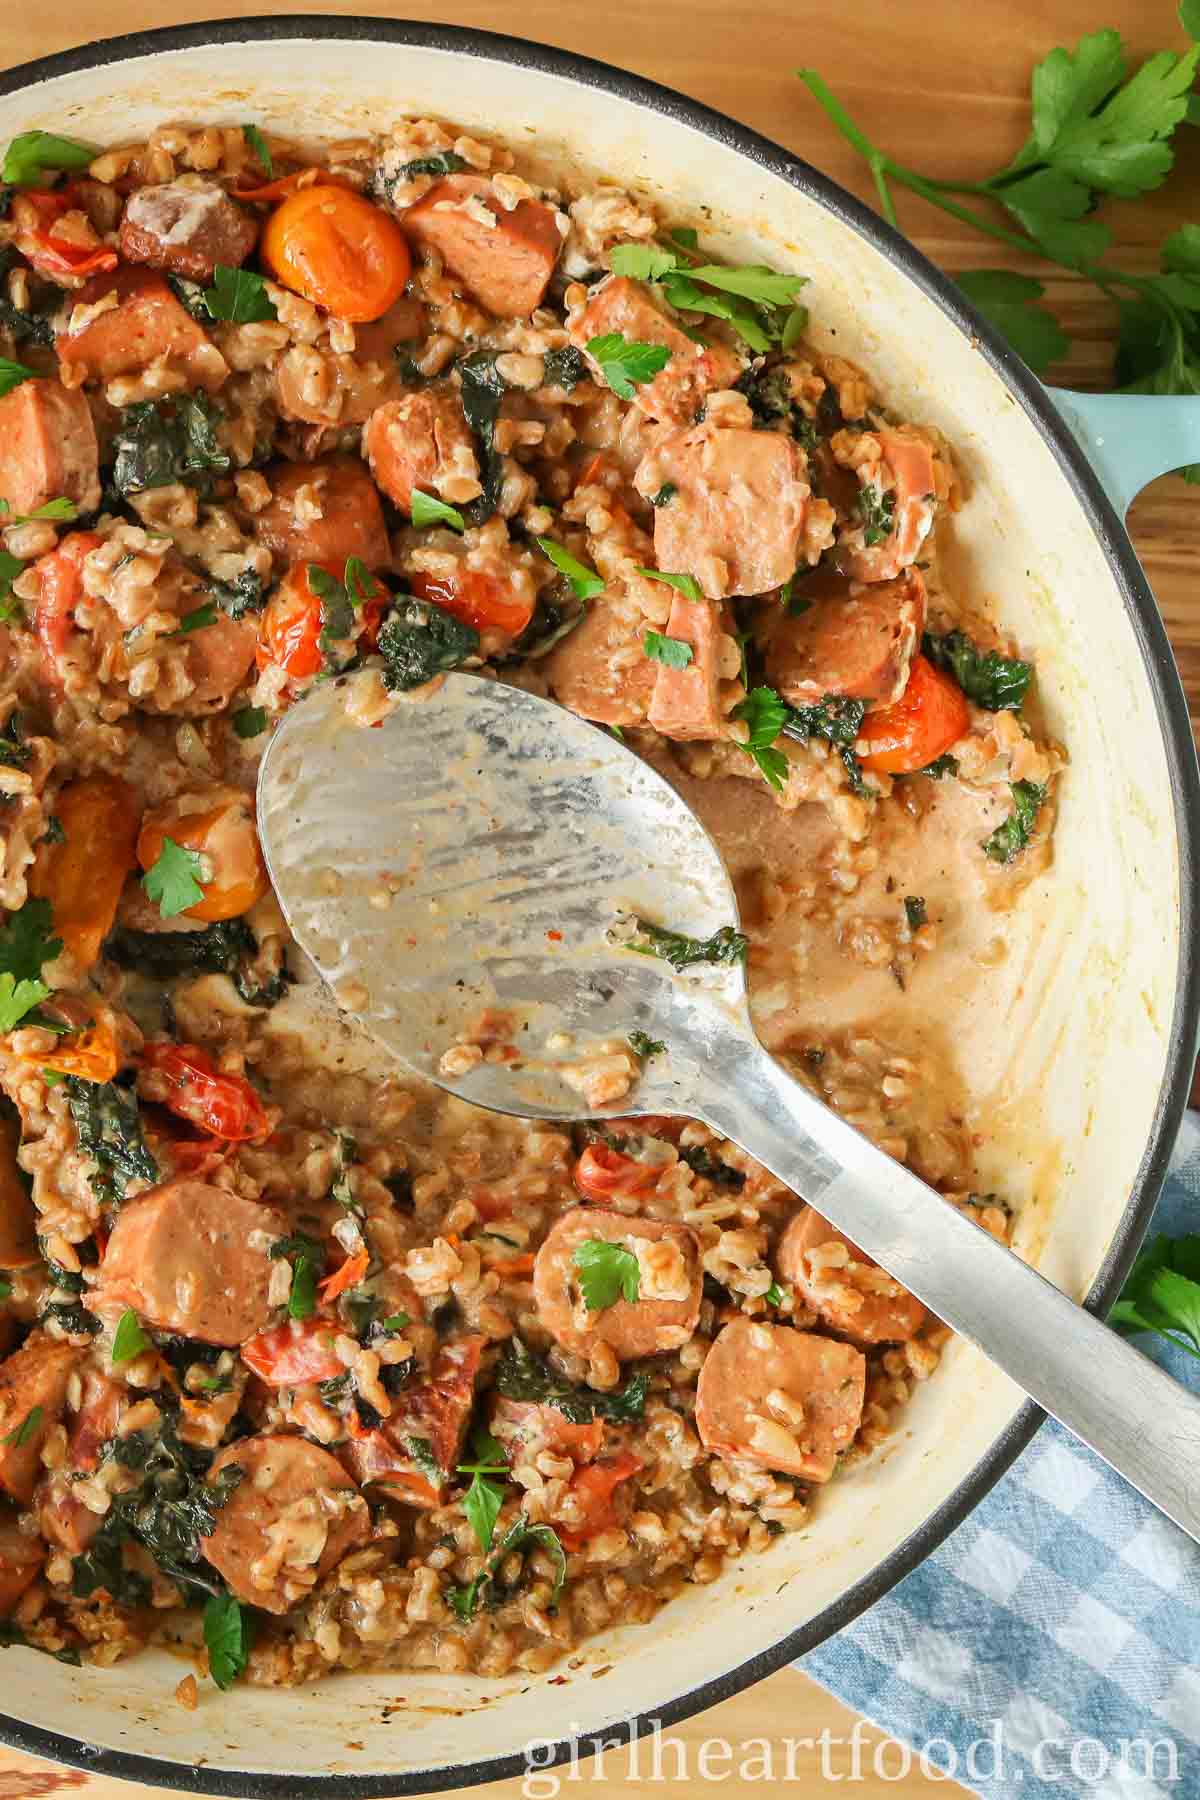 Farro, sausage and vegetables in a pan with a serving spoon resting in it.